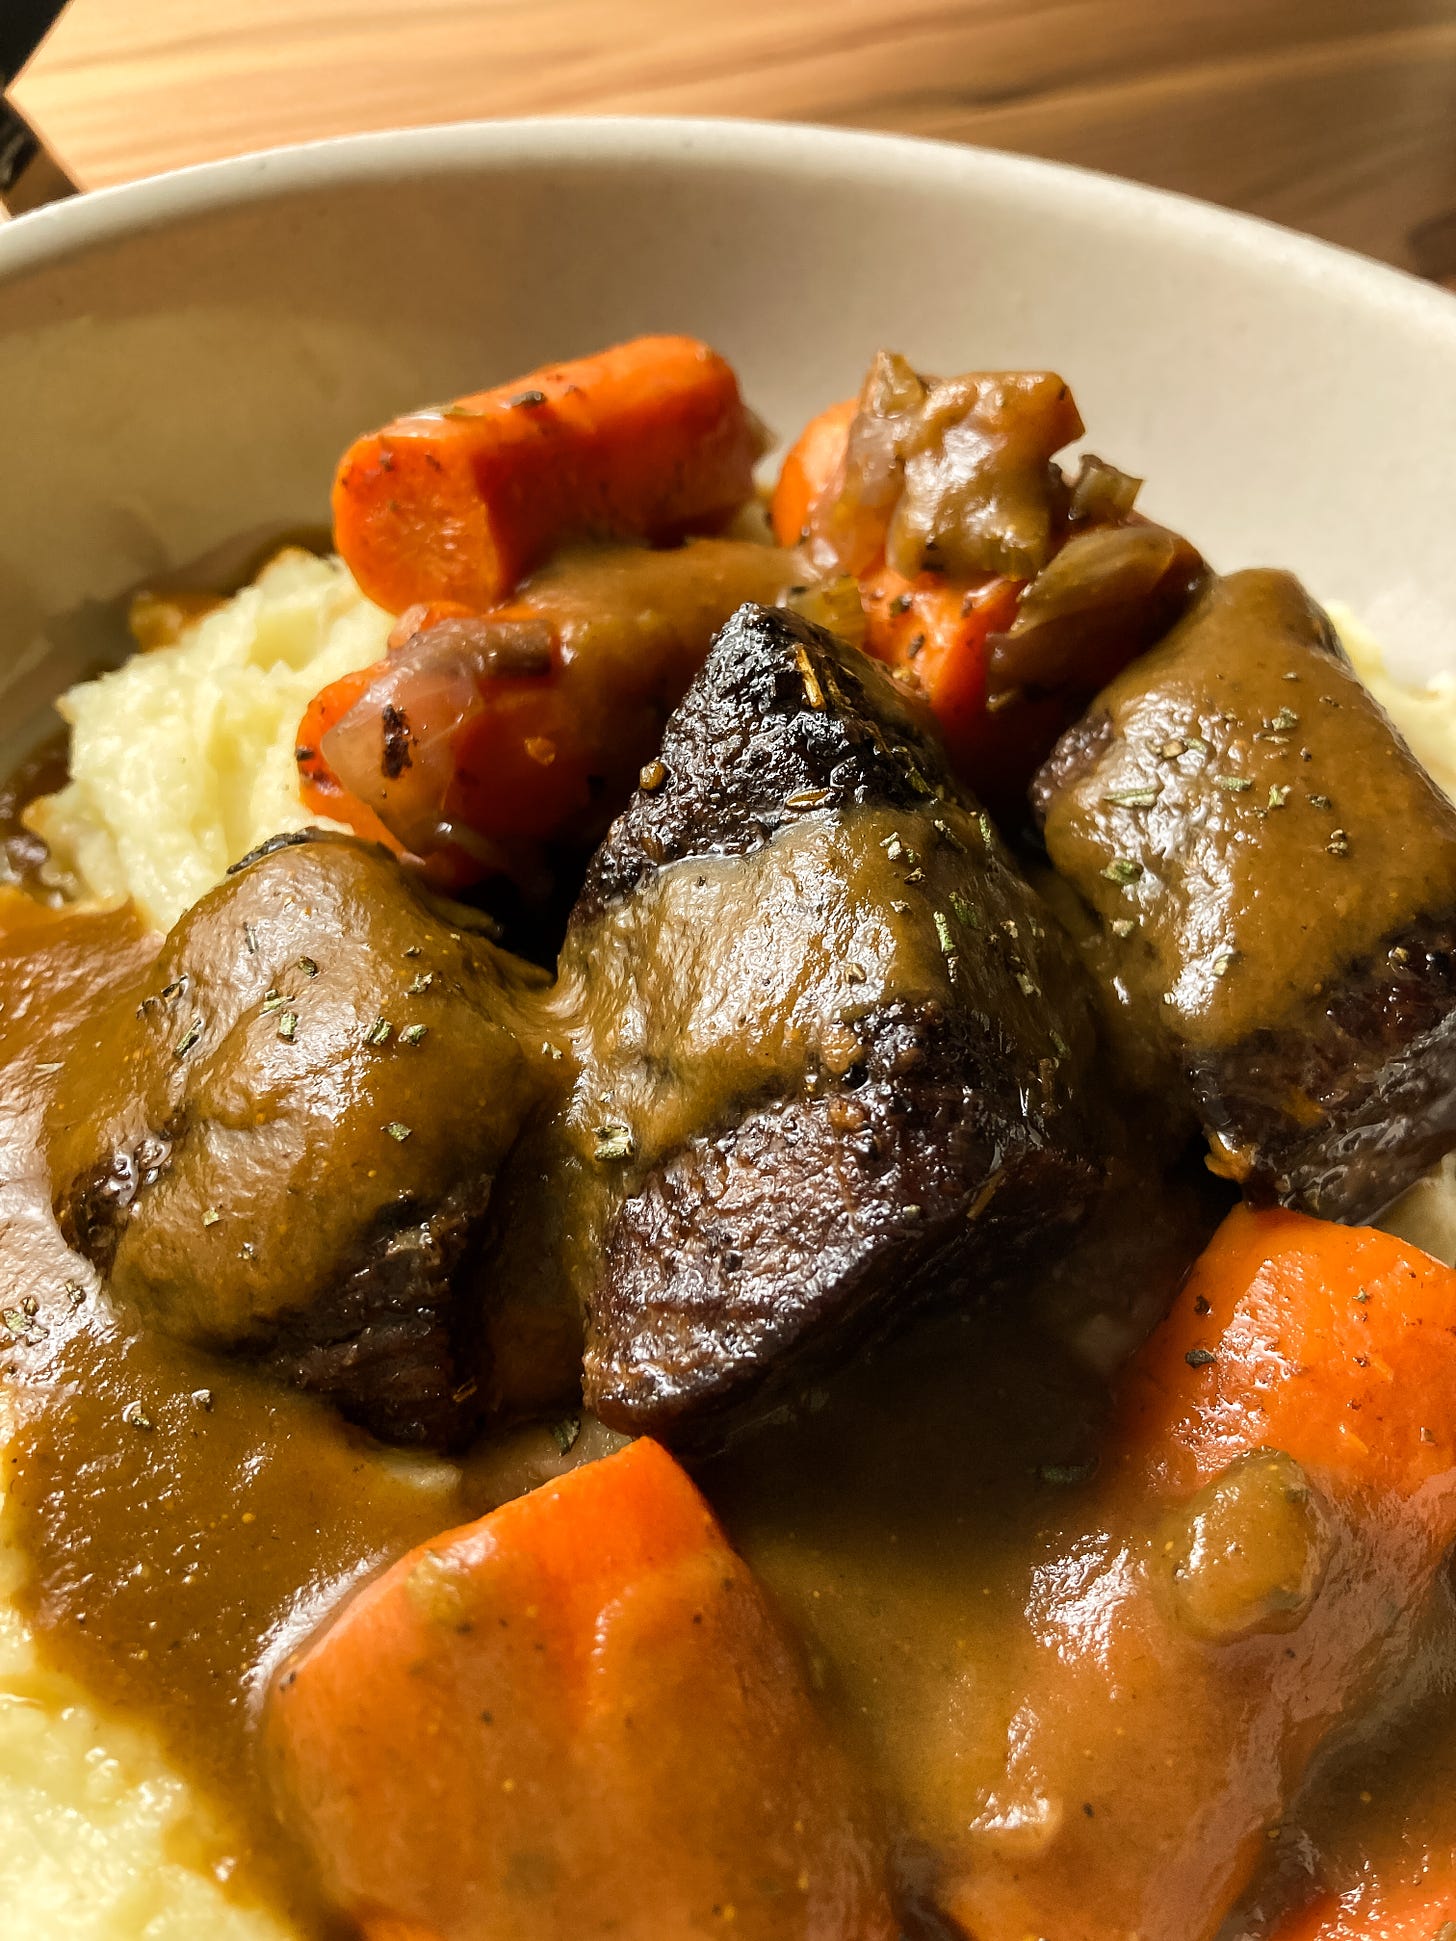 A super close shot of braised short ribs and carrots with gravy, all on a bed of mashed potatoes.